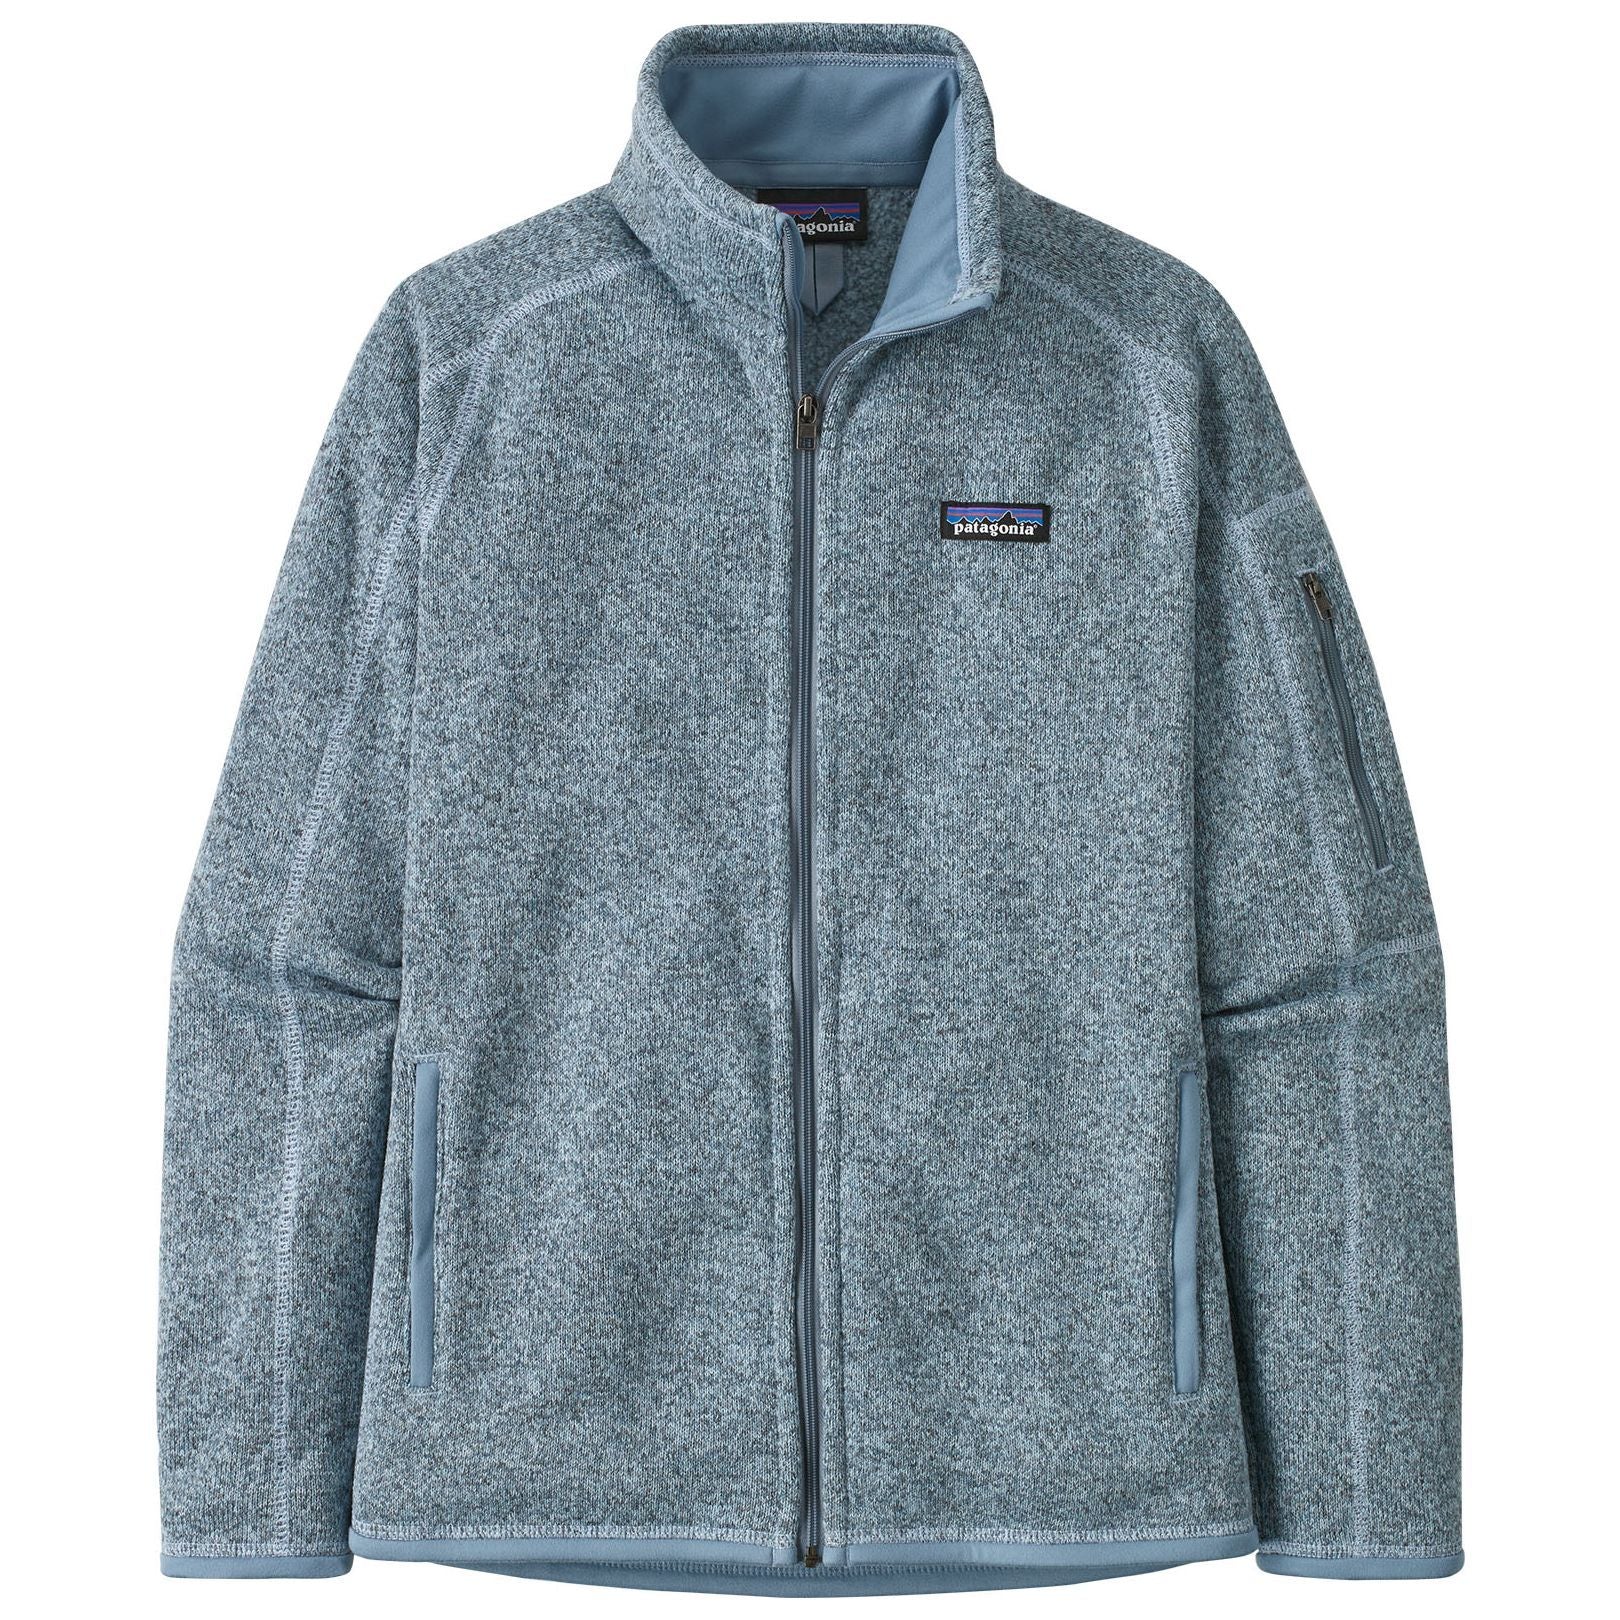 Patagonia Women's Better Sweater Jacket Steam Blue Image 01